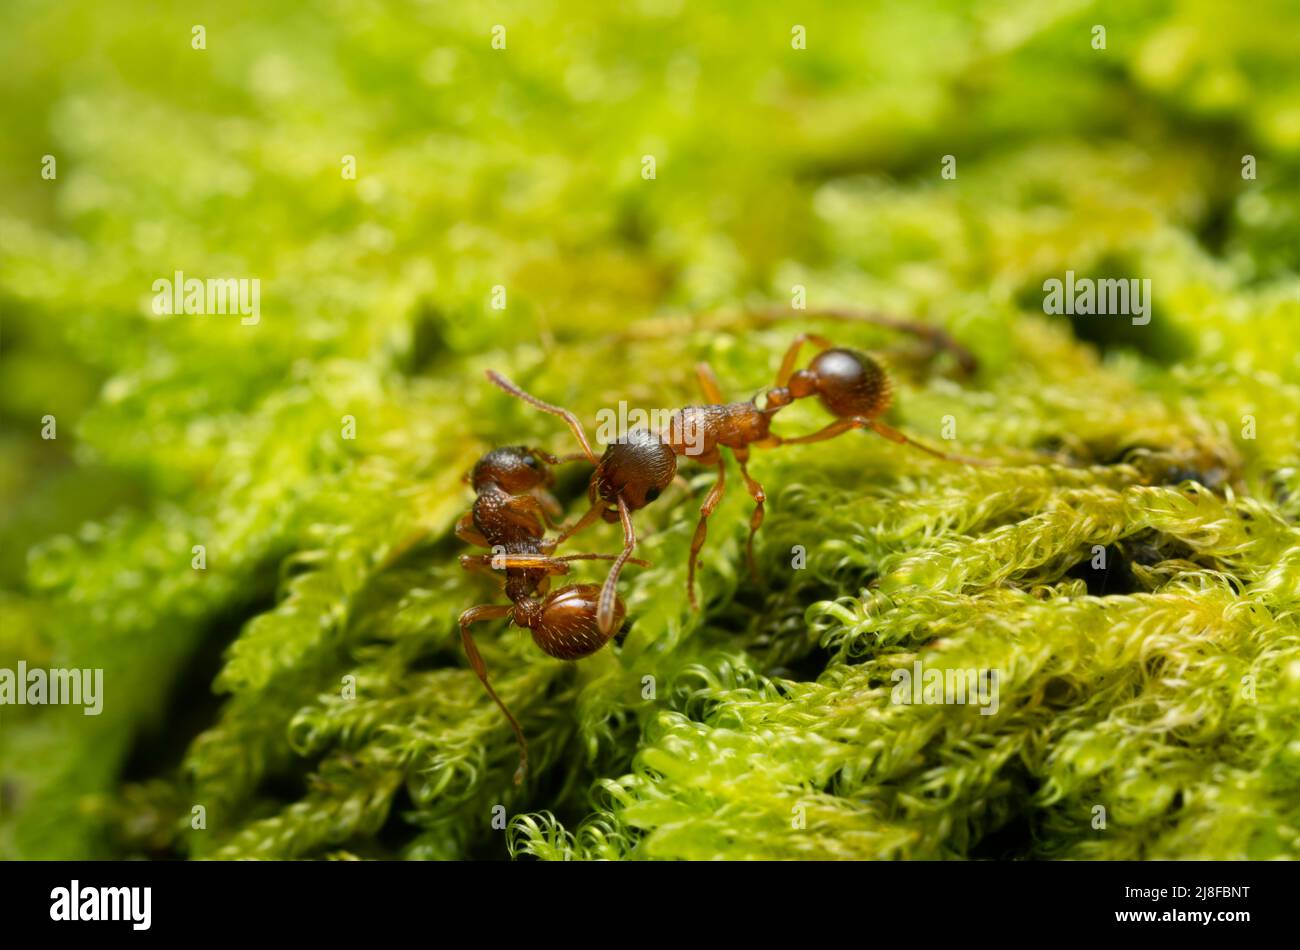 Red ant, Myrmica carrying ant among moss photographed with high magnification Stock Photo